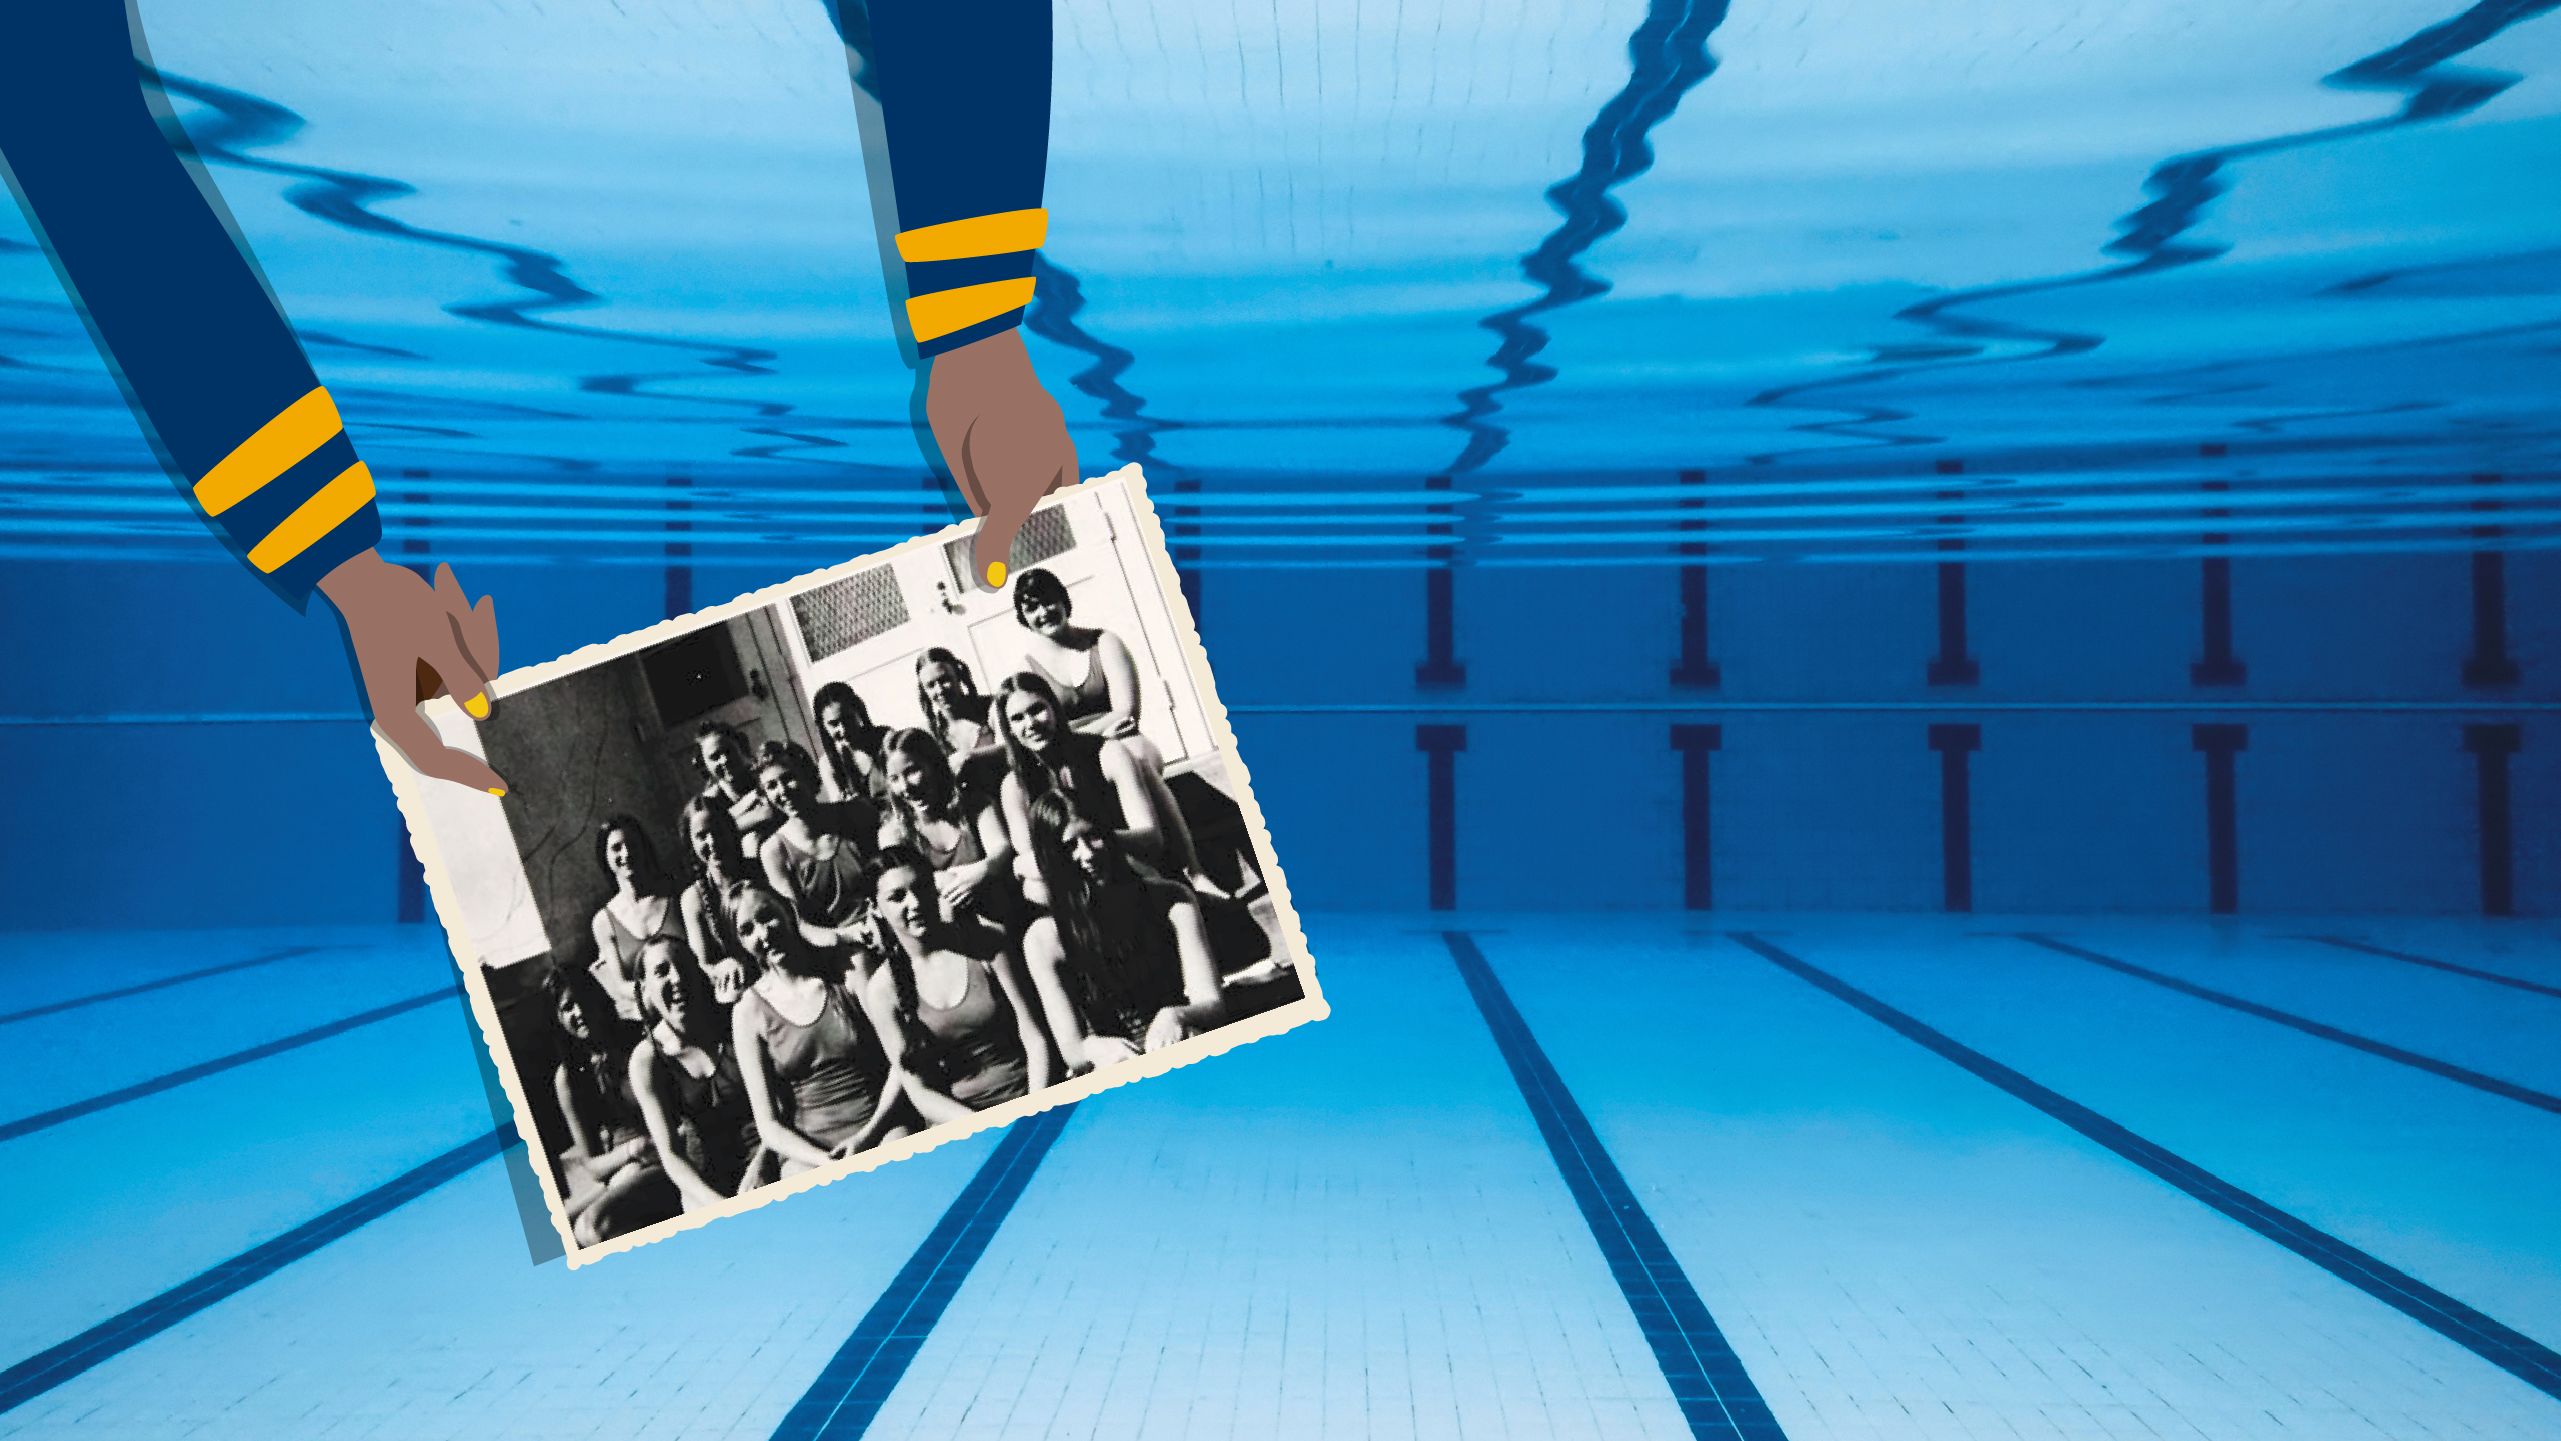 Women from Emory University's 1973 Swimming and Diving team pose poolside.